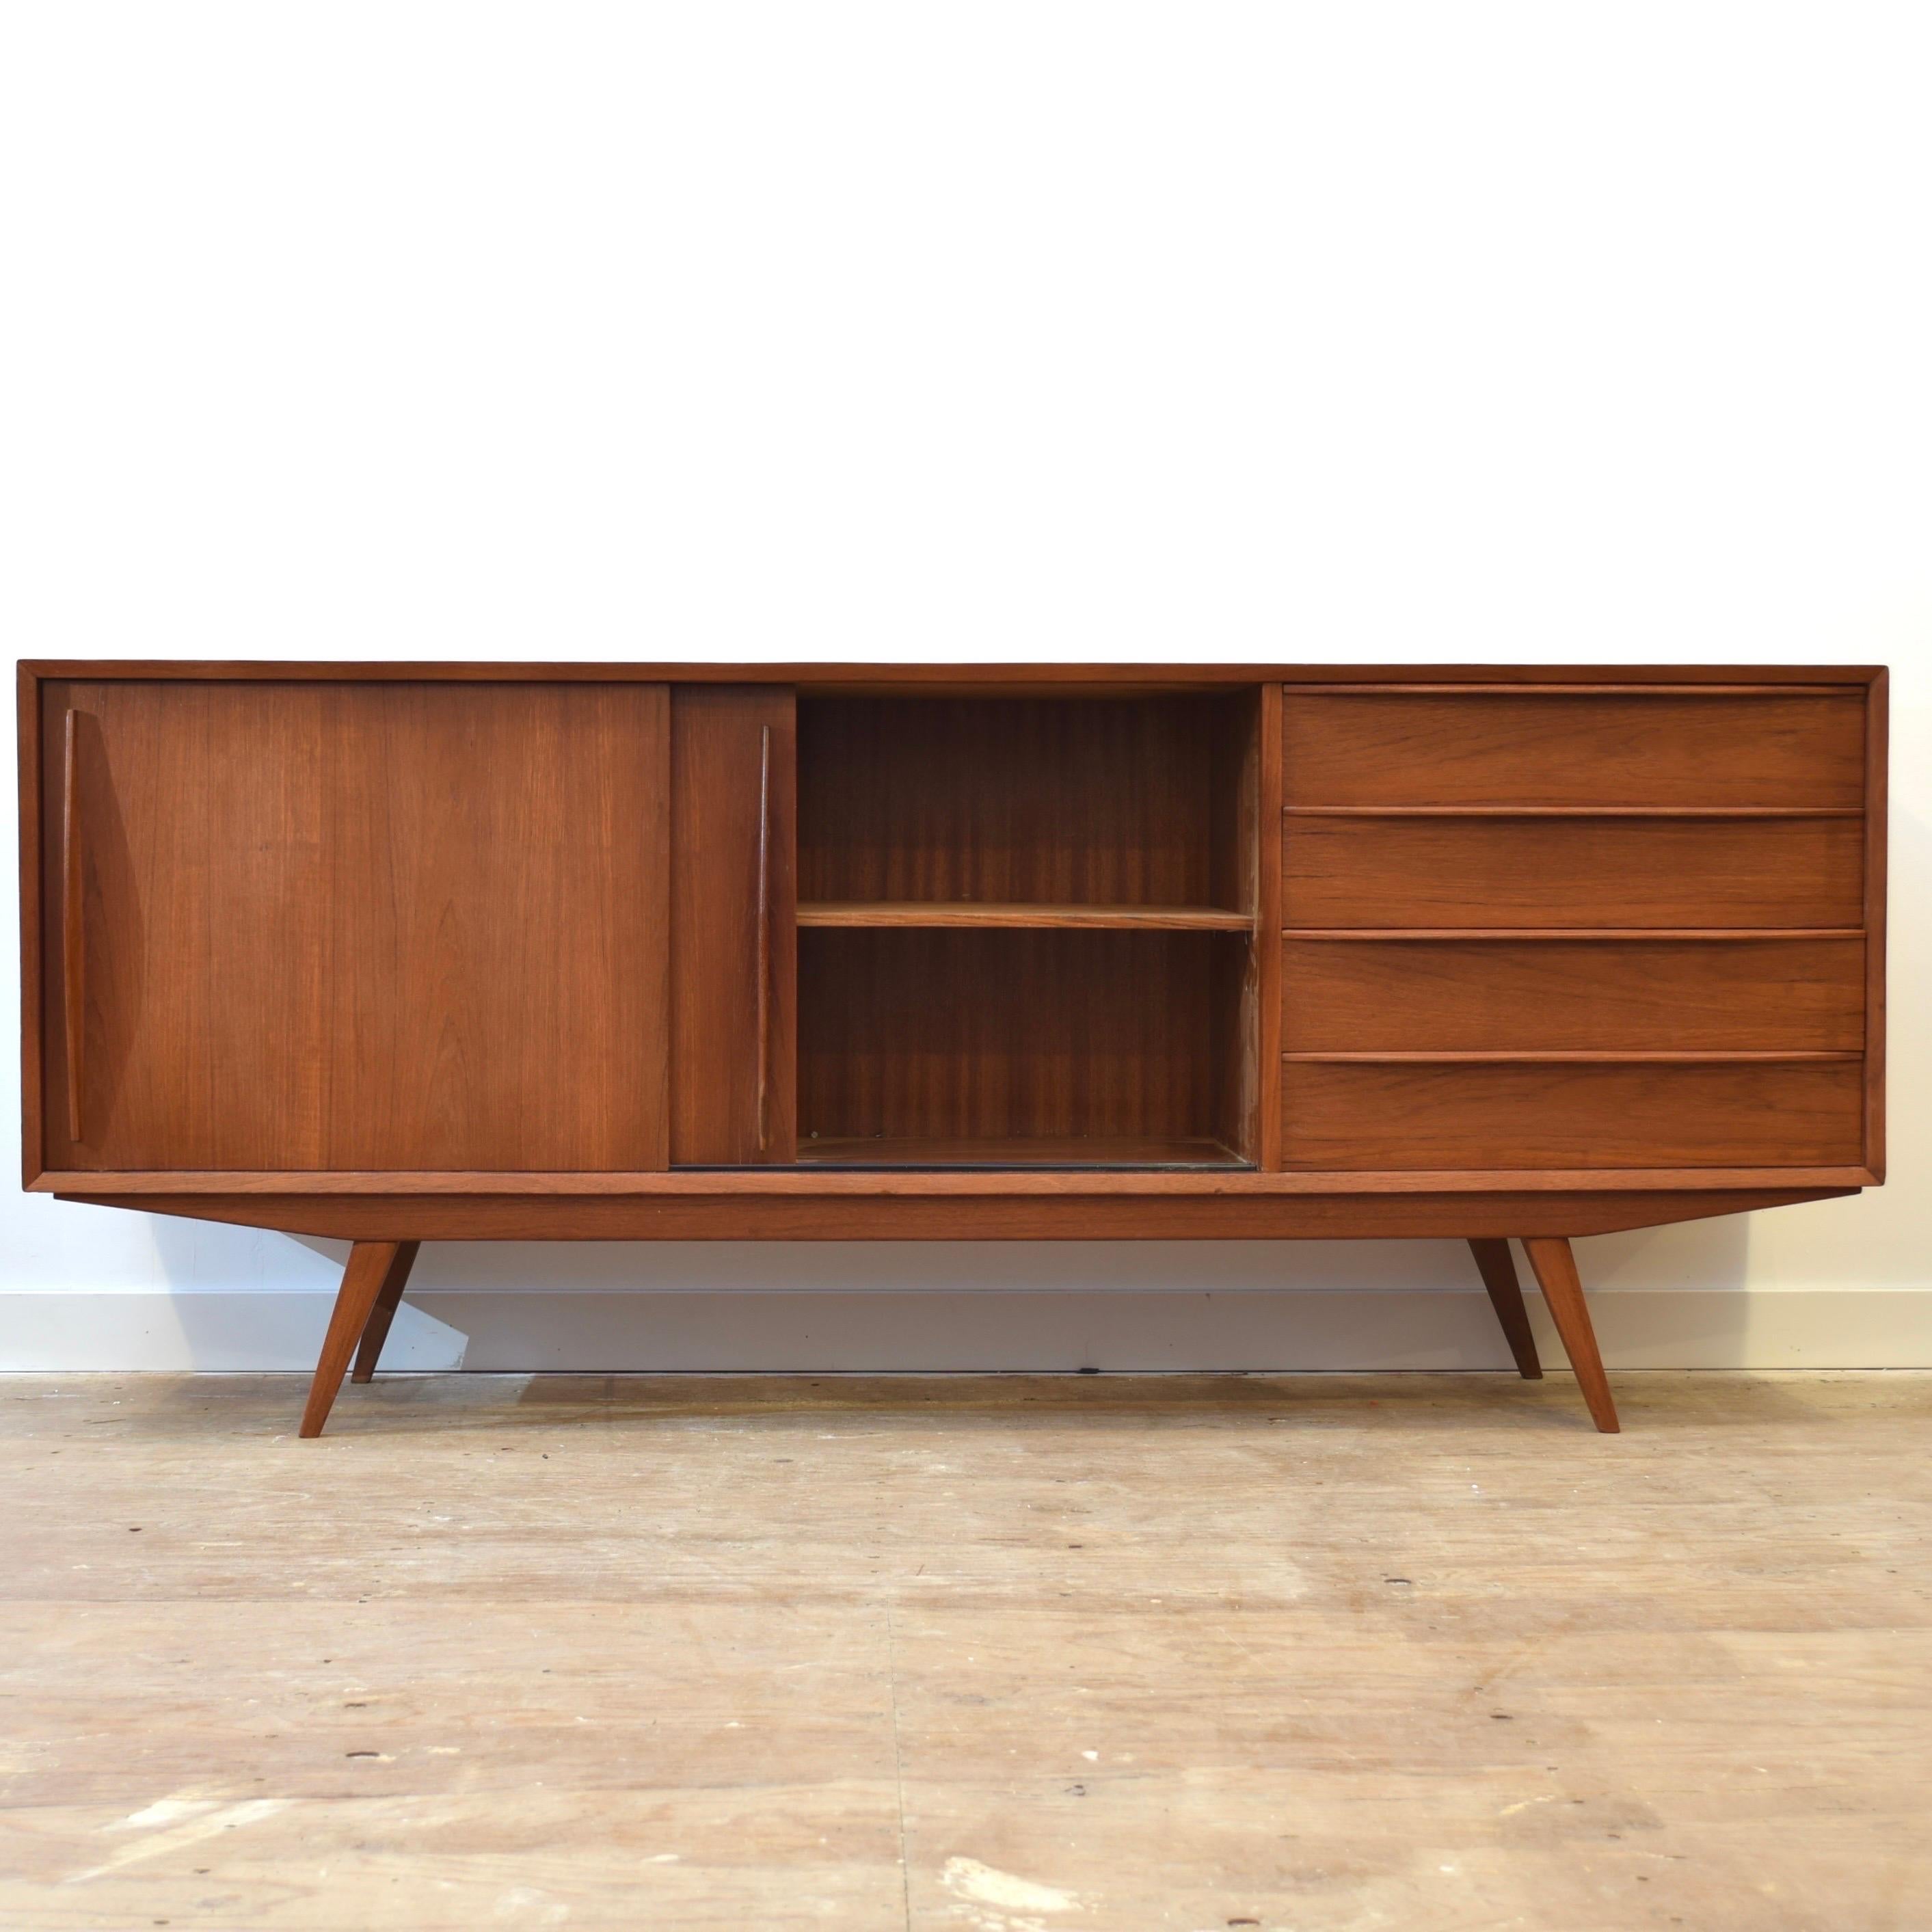 Danish Teak Sideboard In Good Condition For Sale In Puslinch, ON